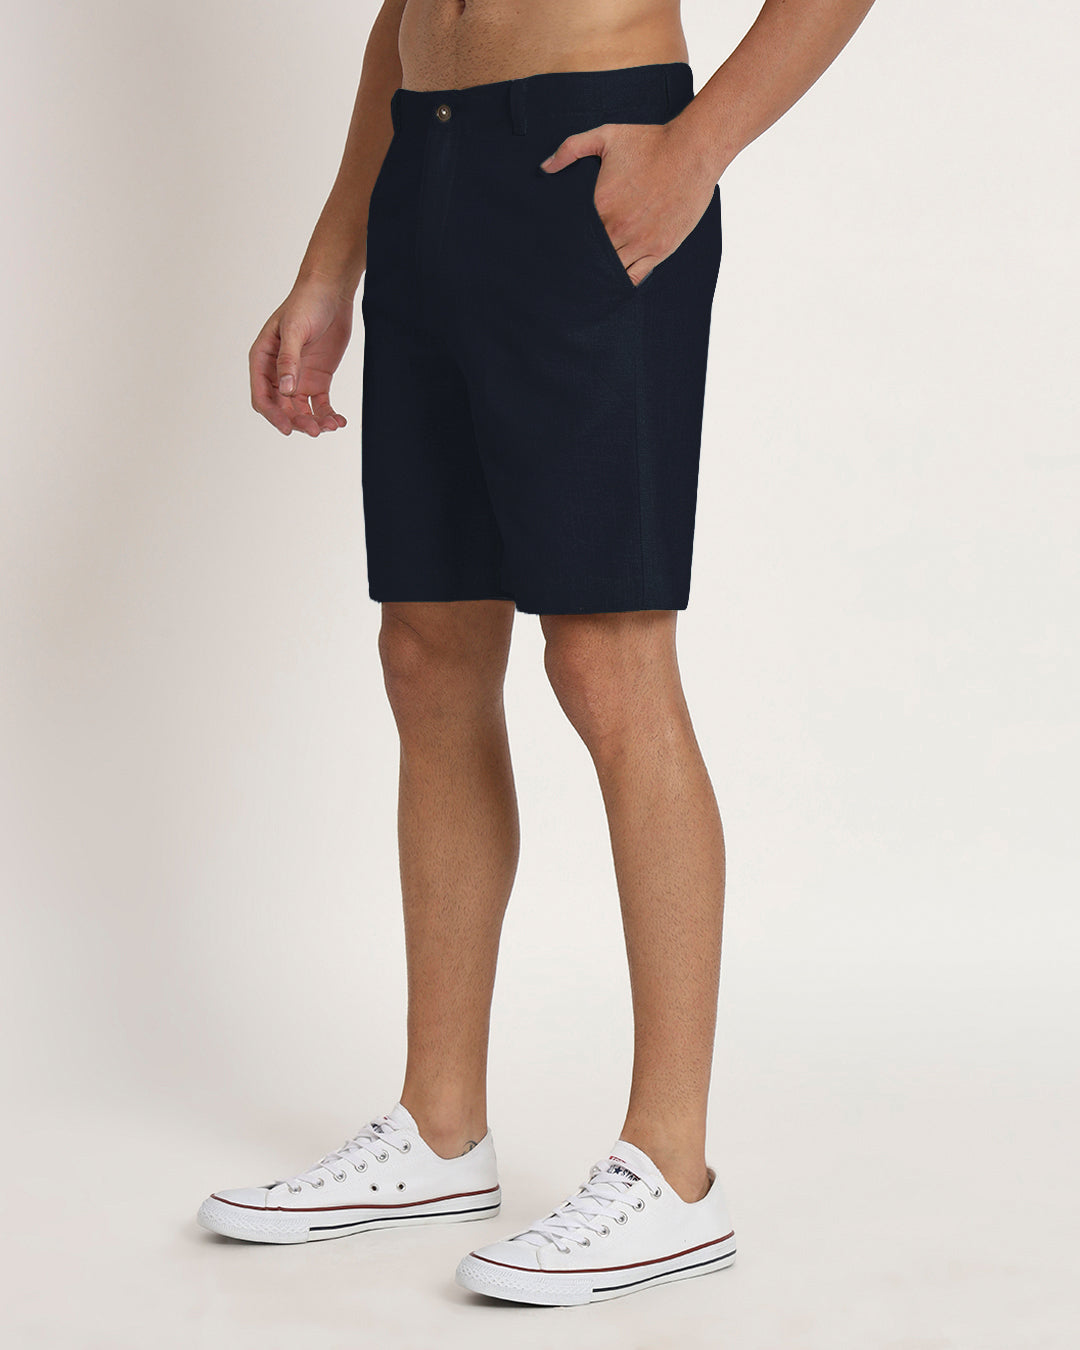 Combo : Ready For Anything Midnight Blue & Fondant Pink Men's Shorts